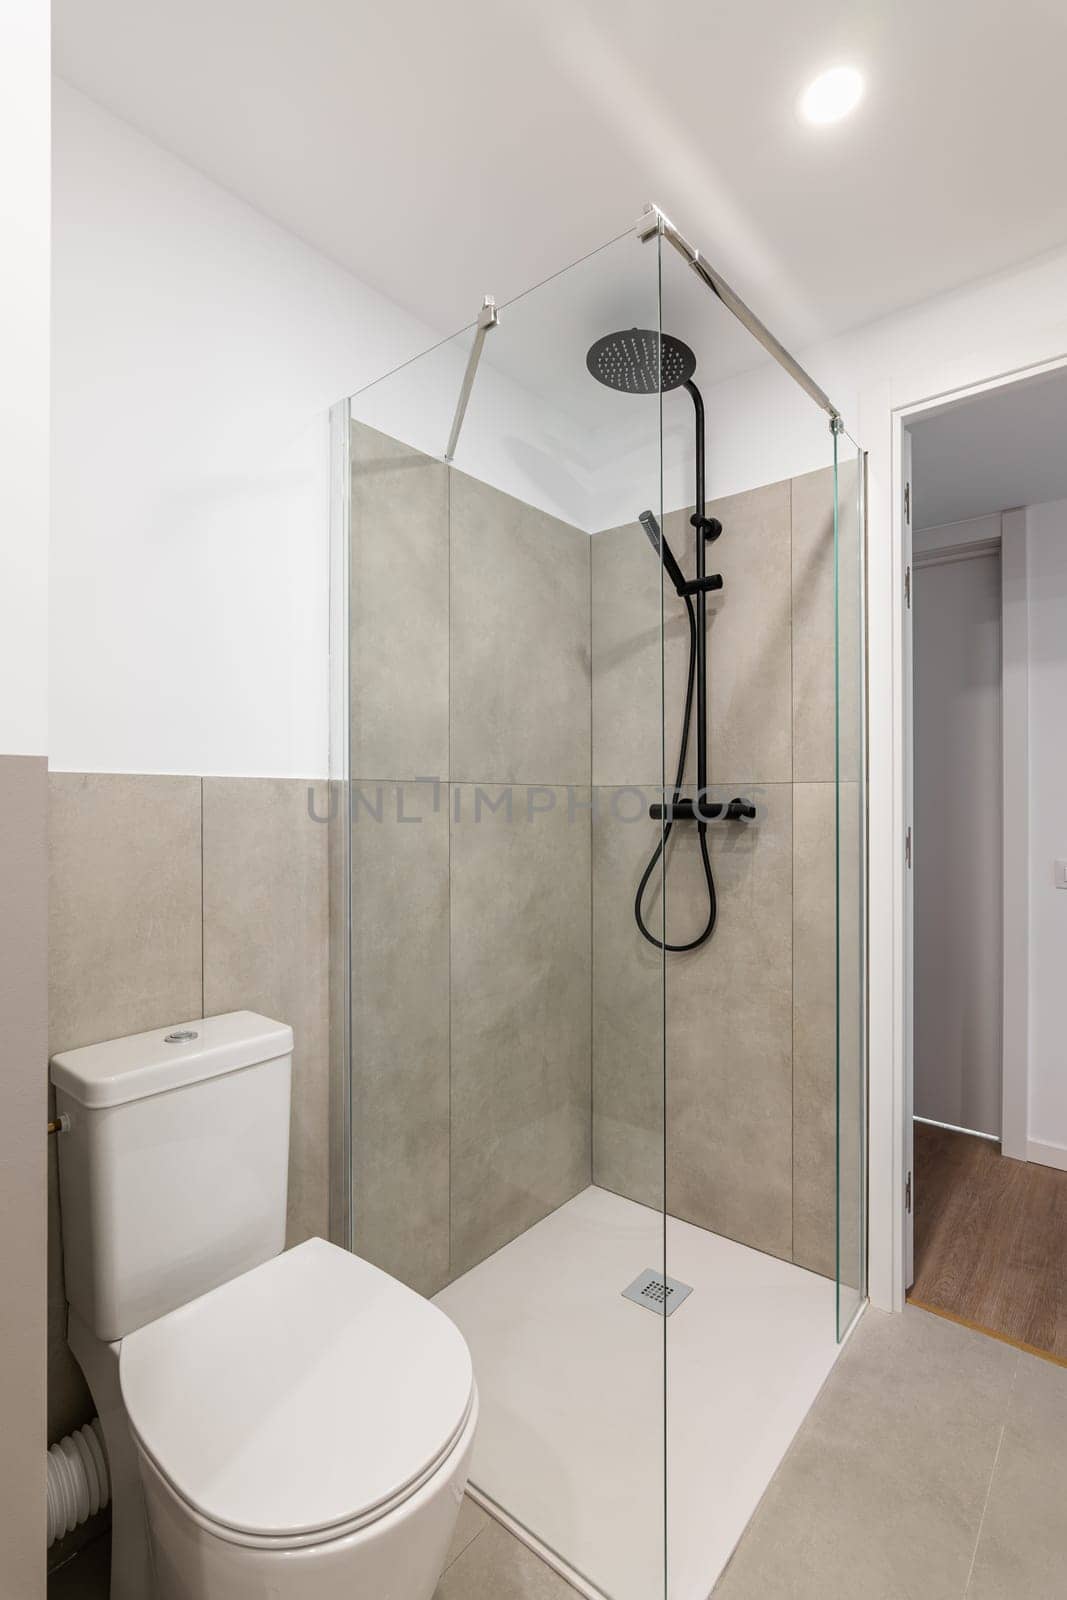 An empty tiny bathroom with a toilet and a glazed shower with gray tiles. The concept of a simple and stylish bathroom in an apartment or luxury hotel.